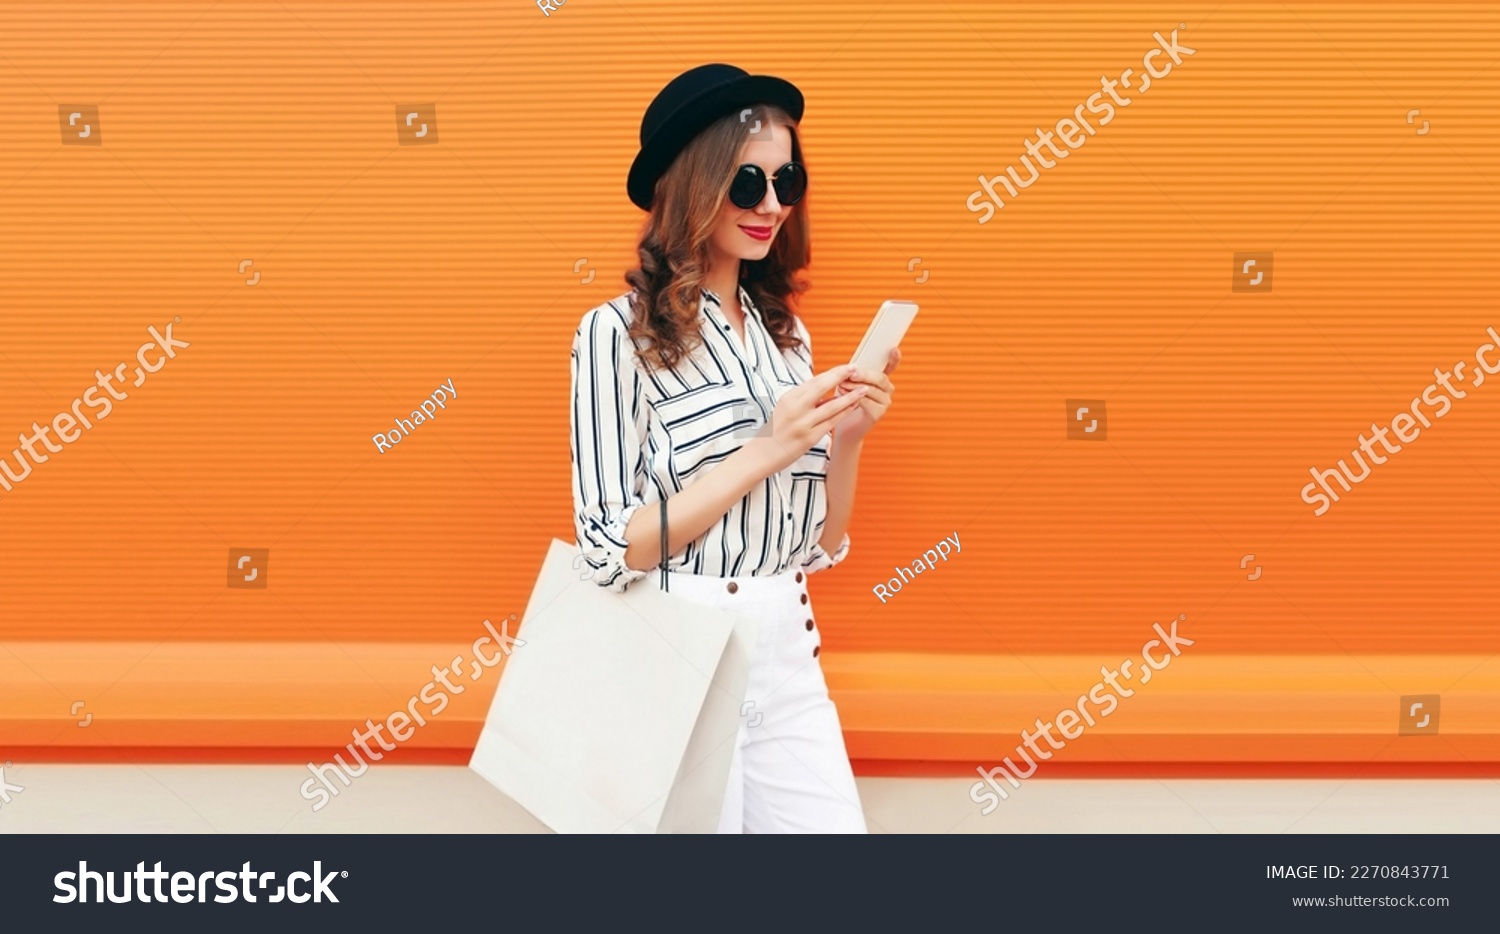 Portrait of beautiful young woman looking at smartphone with shopping bag wearing white striped shirt, black round hat on orange background #2270843771